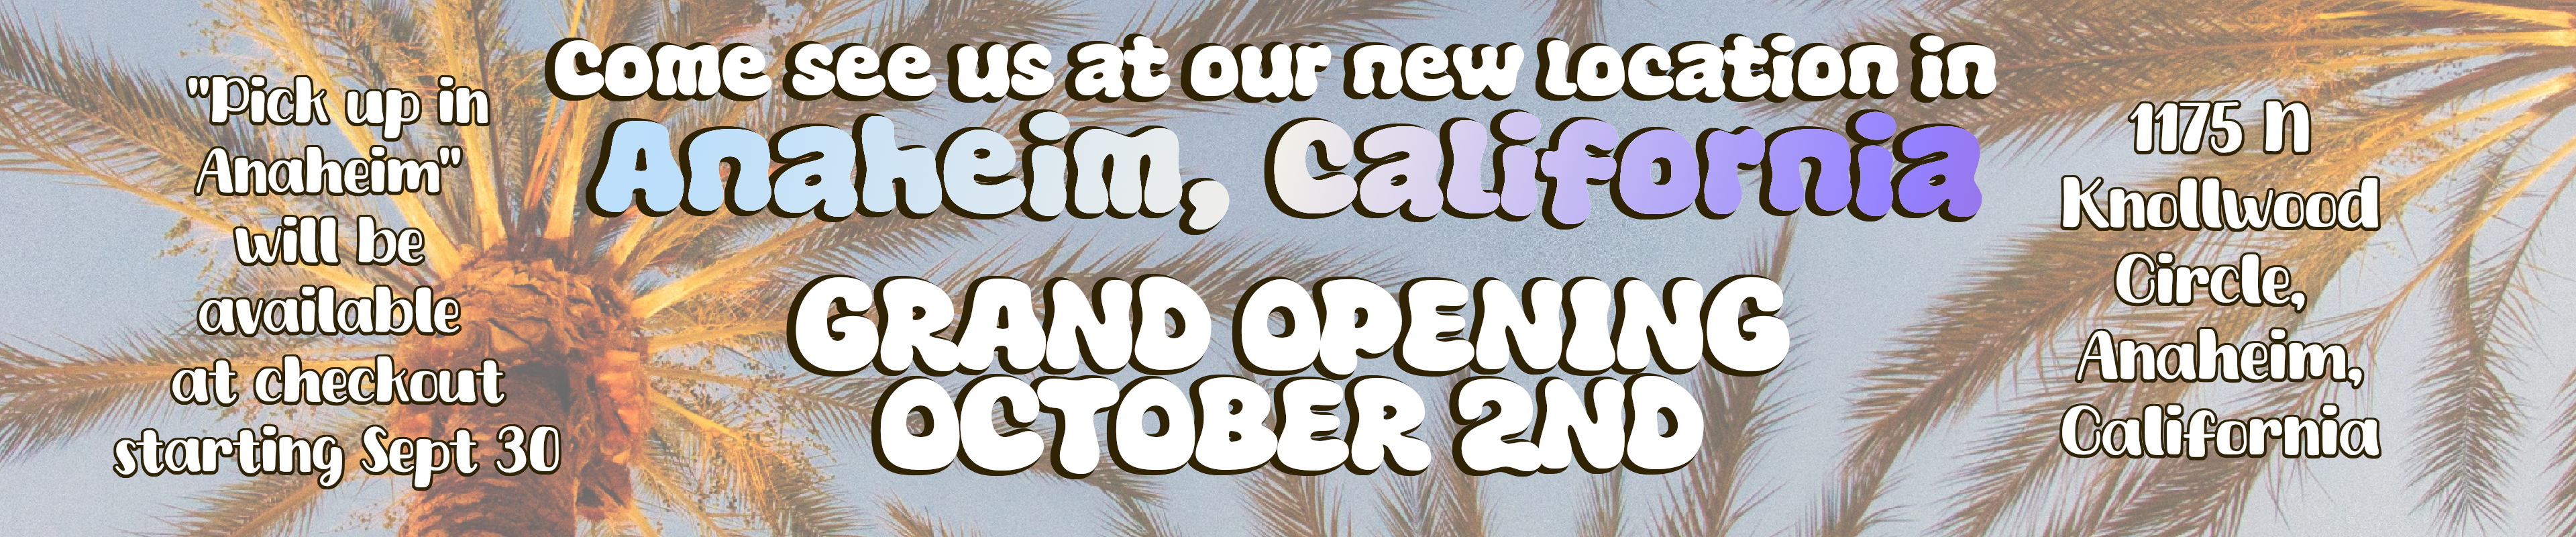 New Anaheim Location opening on October 2nd